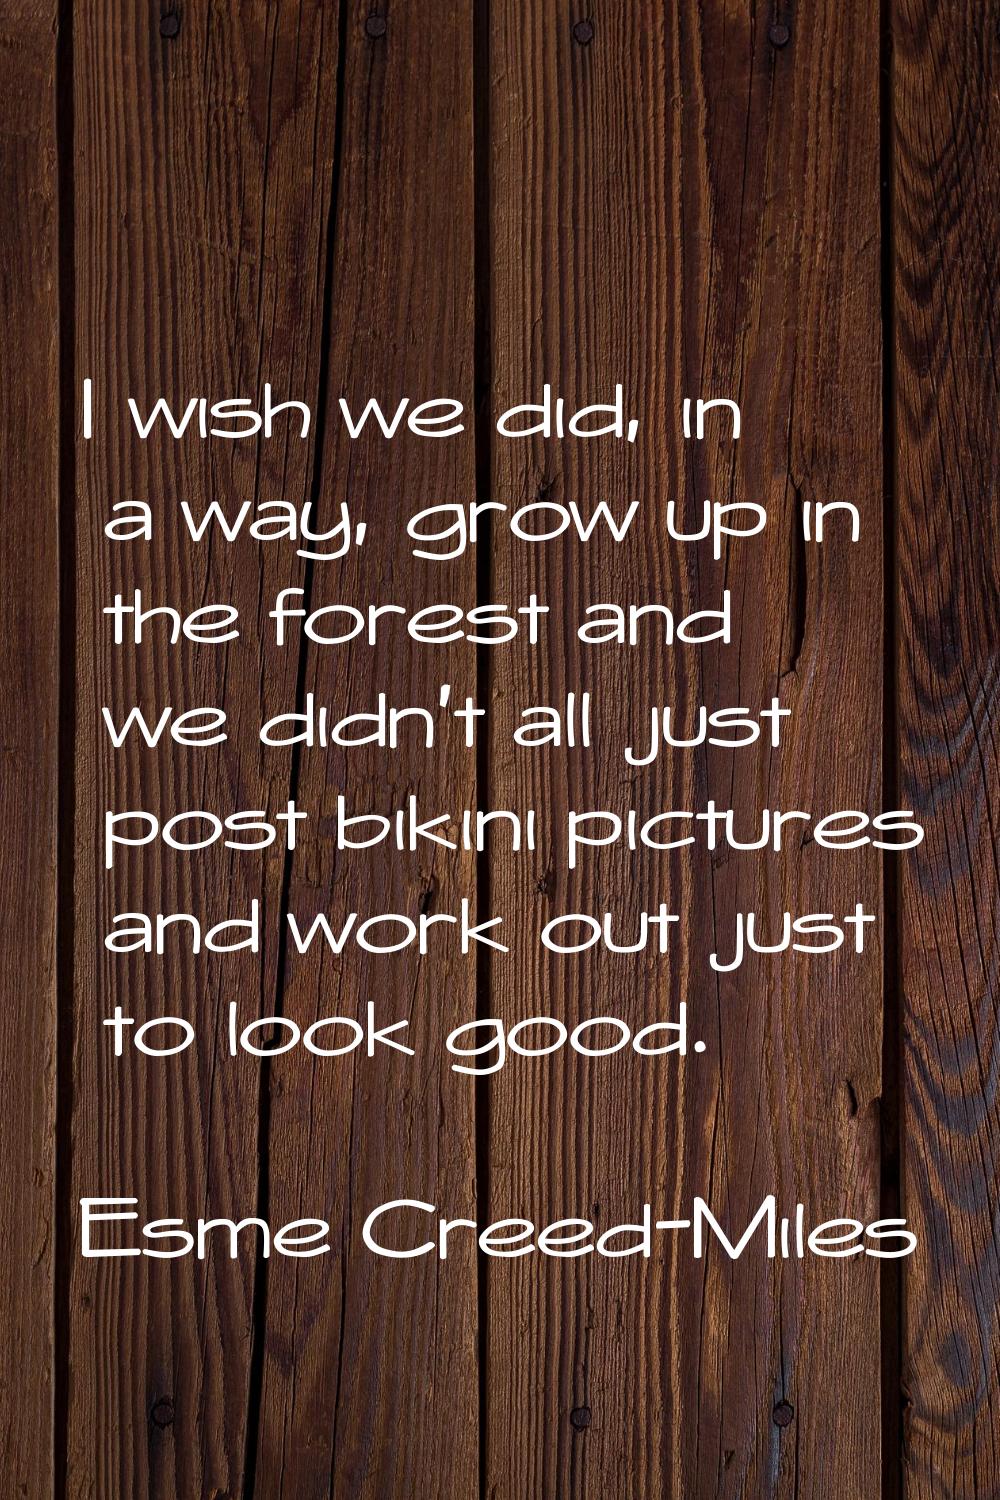 I wish we did, in a way, grow up in the forest and we didn't all just post bikini pictures and work